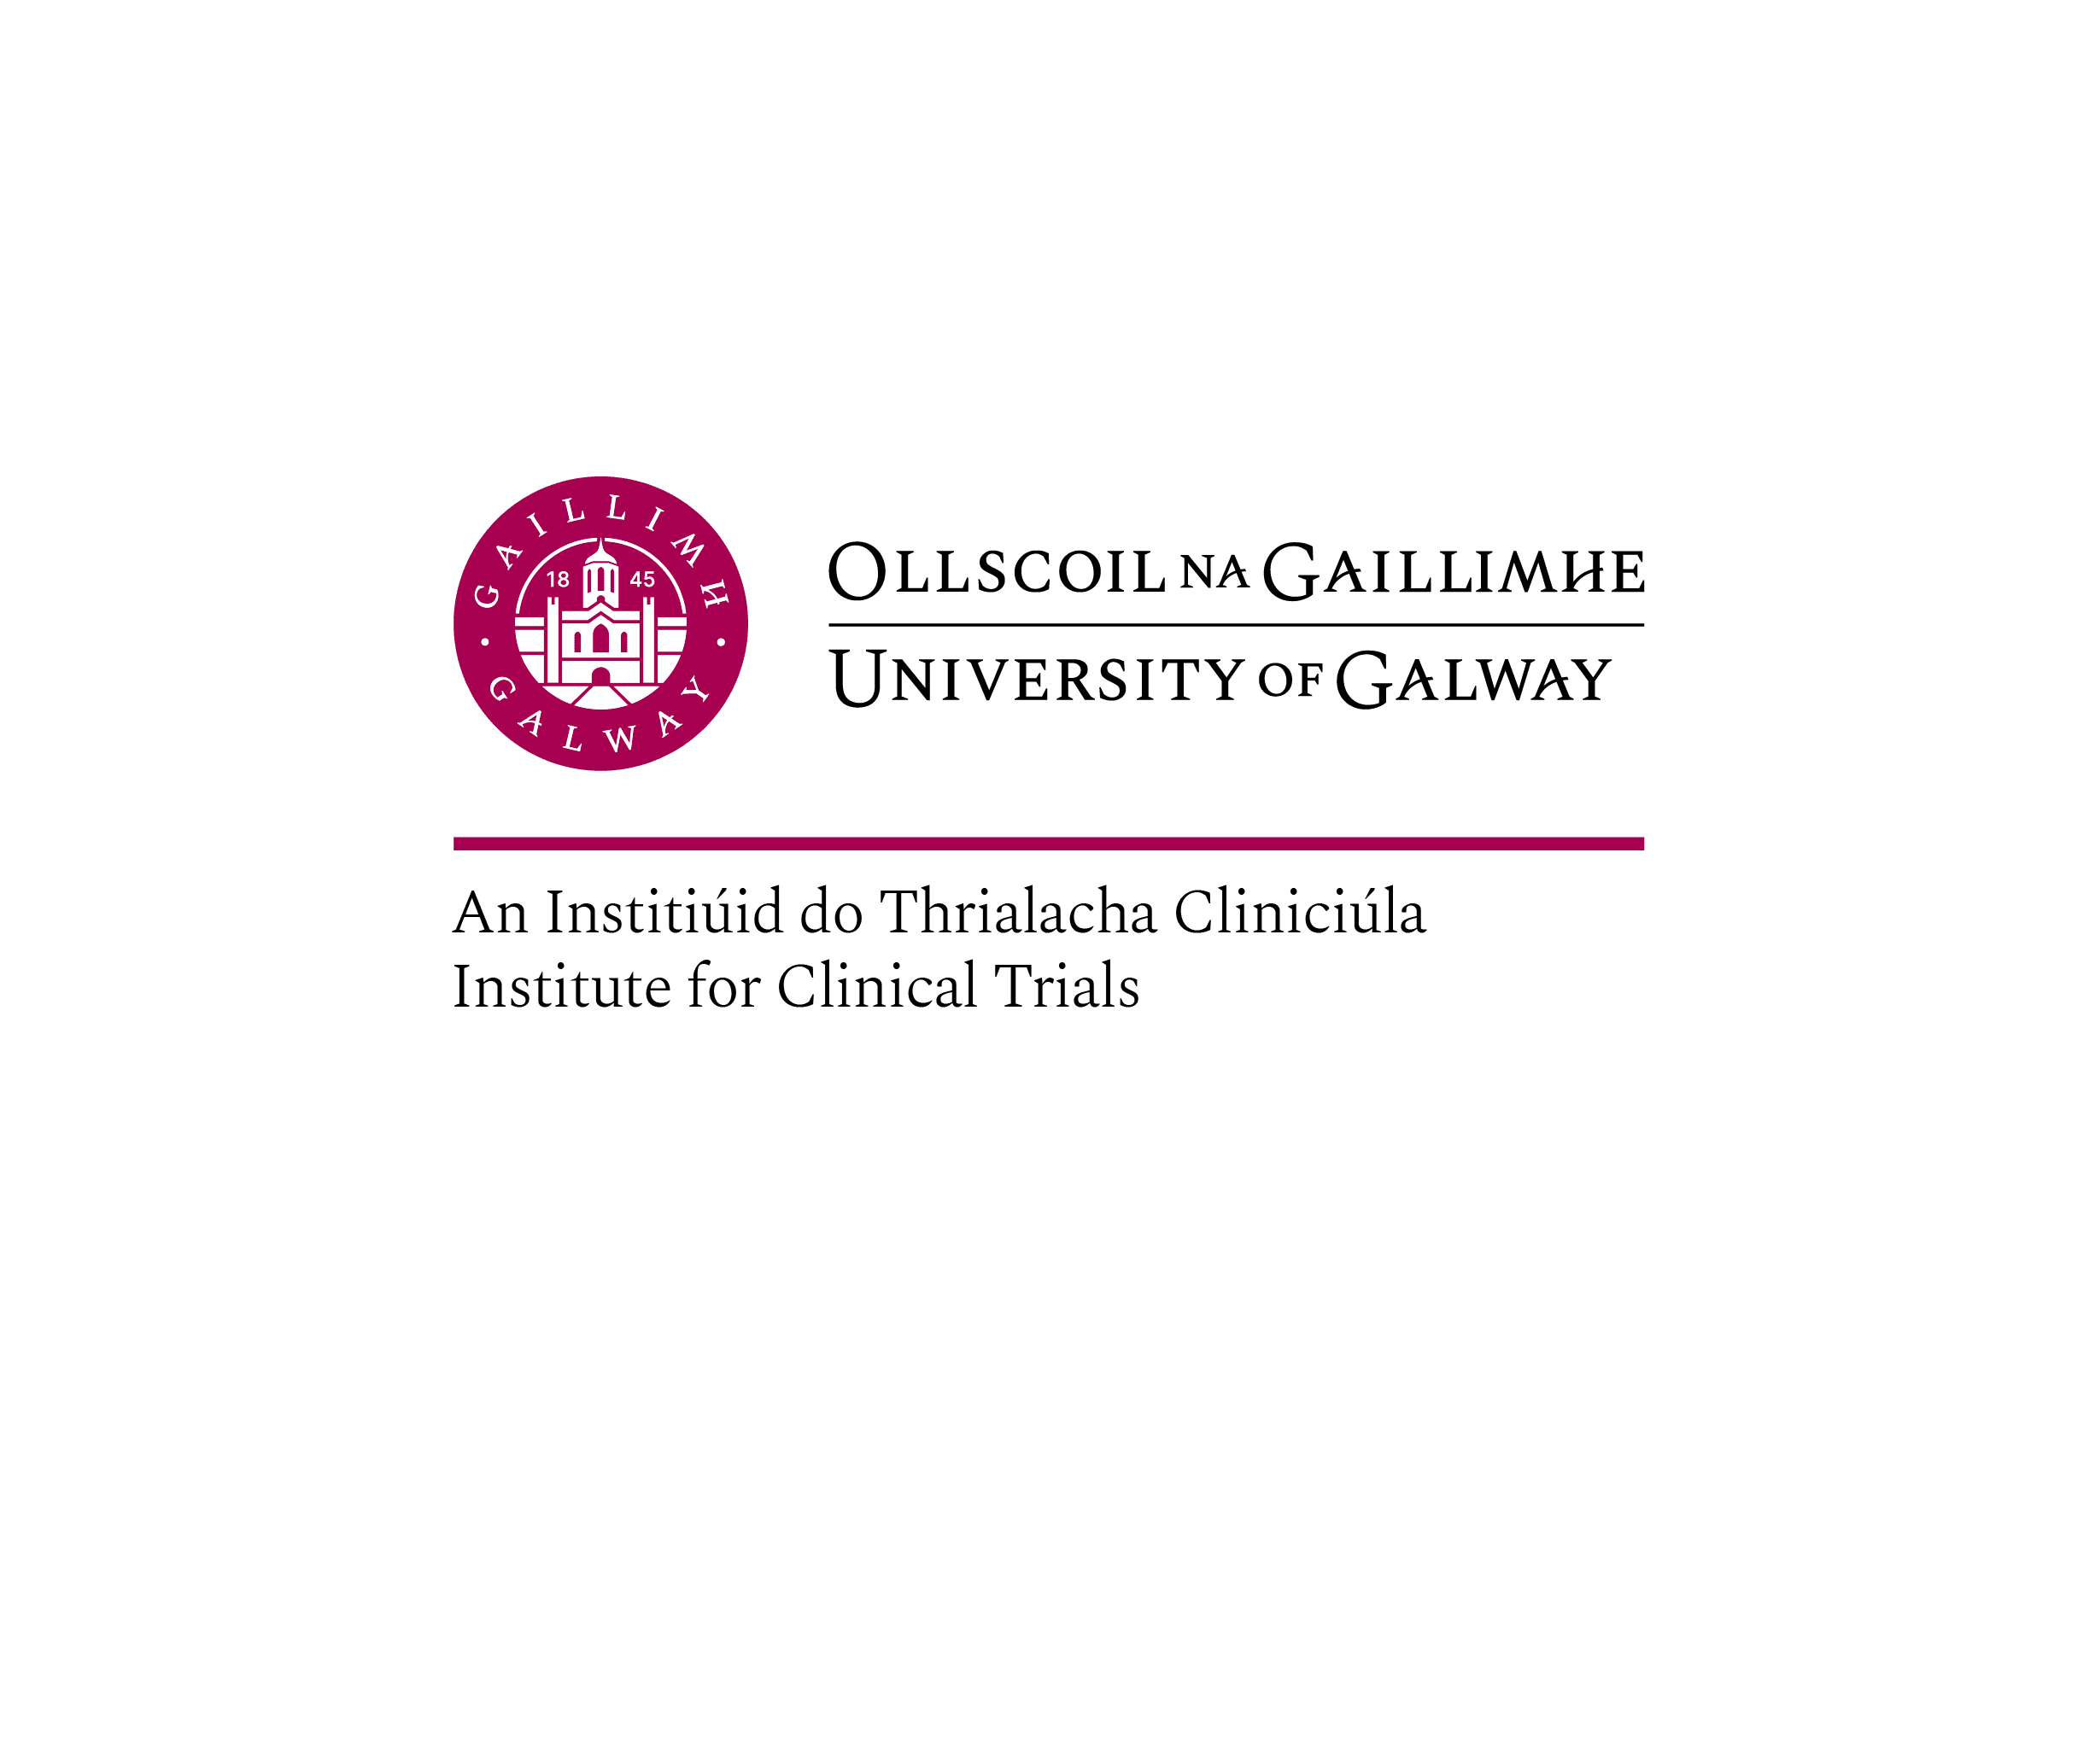 Logo for the Institute for Clinical Trials University of Galway